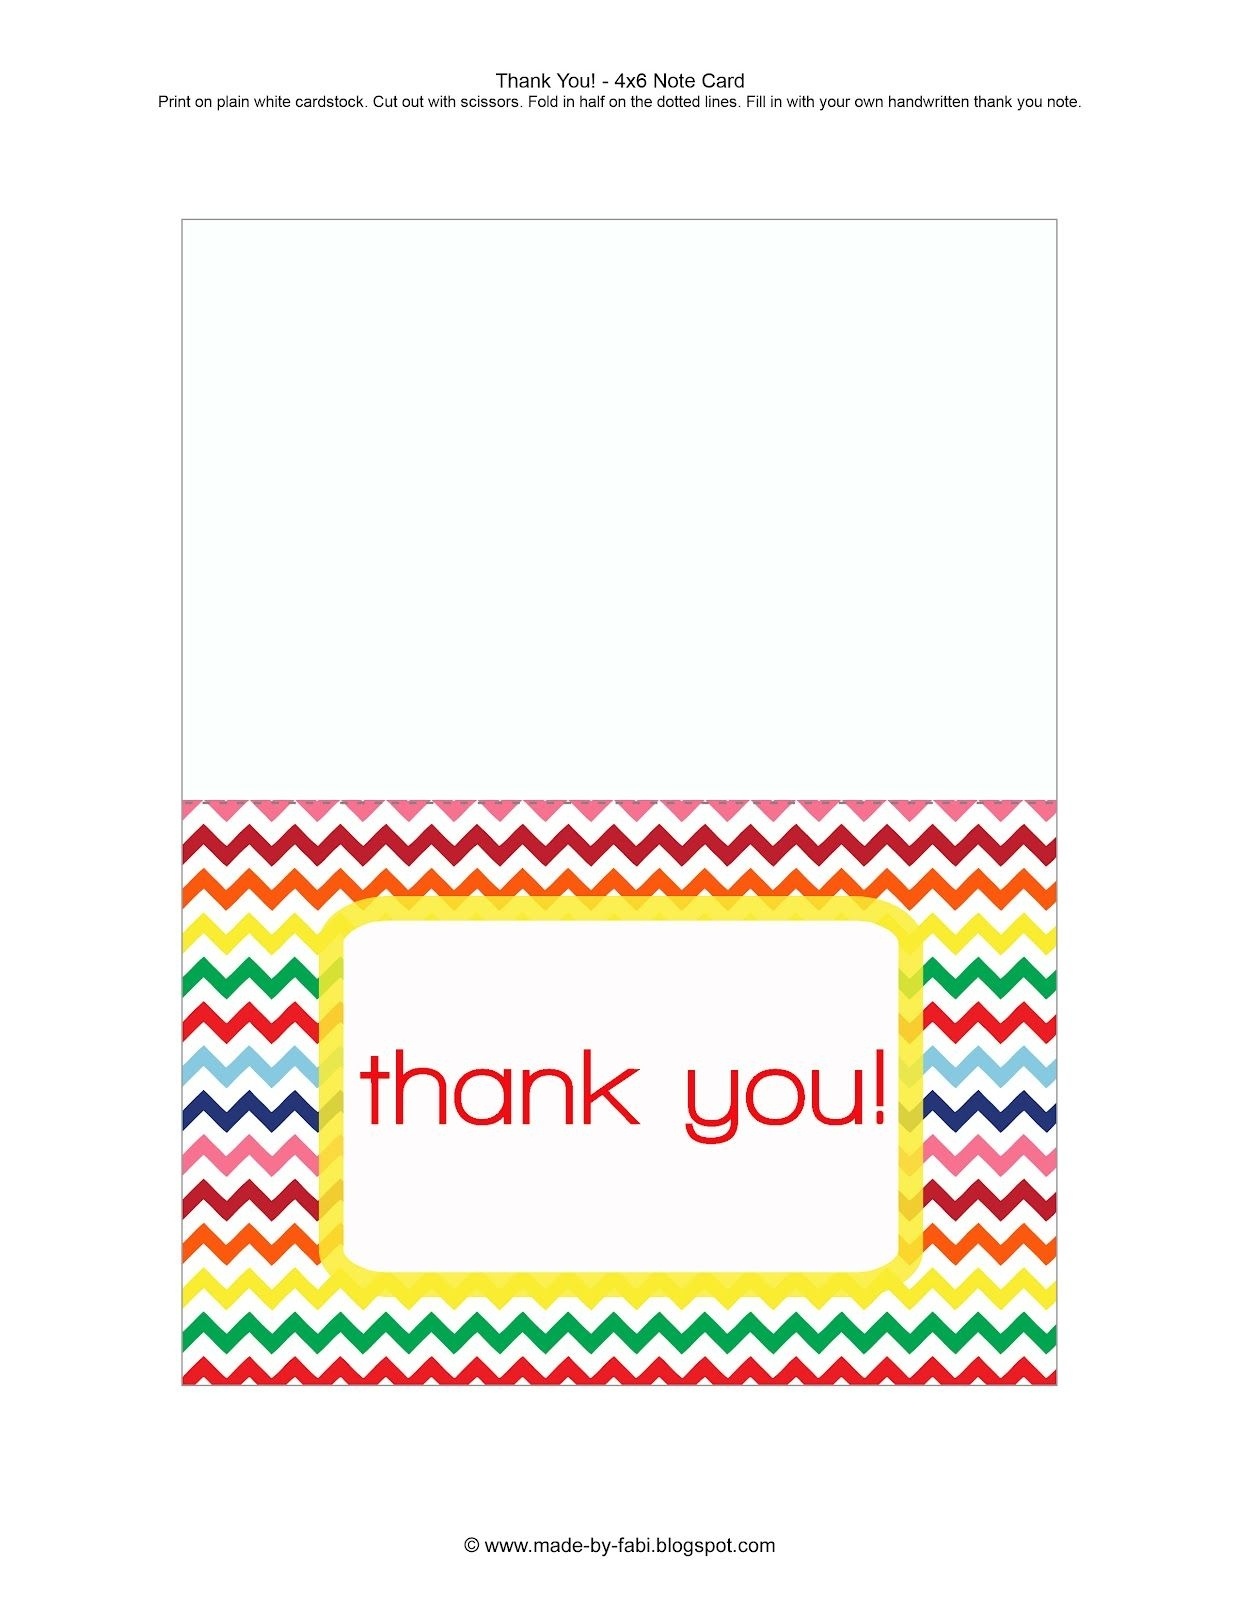 Printable Thank You Cards For Students - Printable Cards - Military Thank You Cards Free Printable